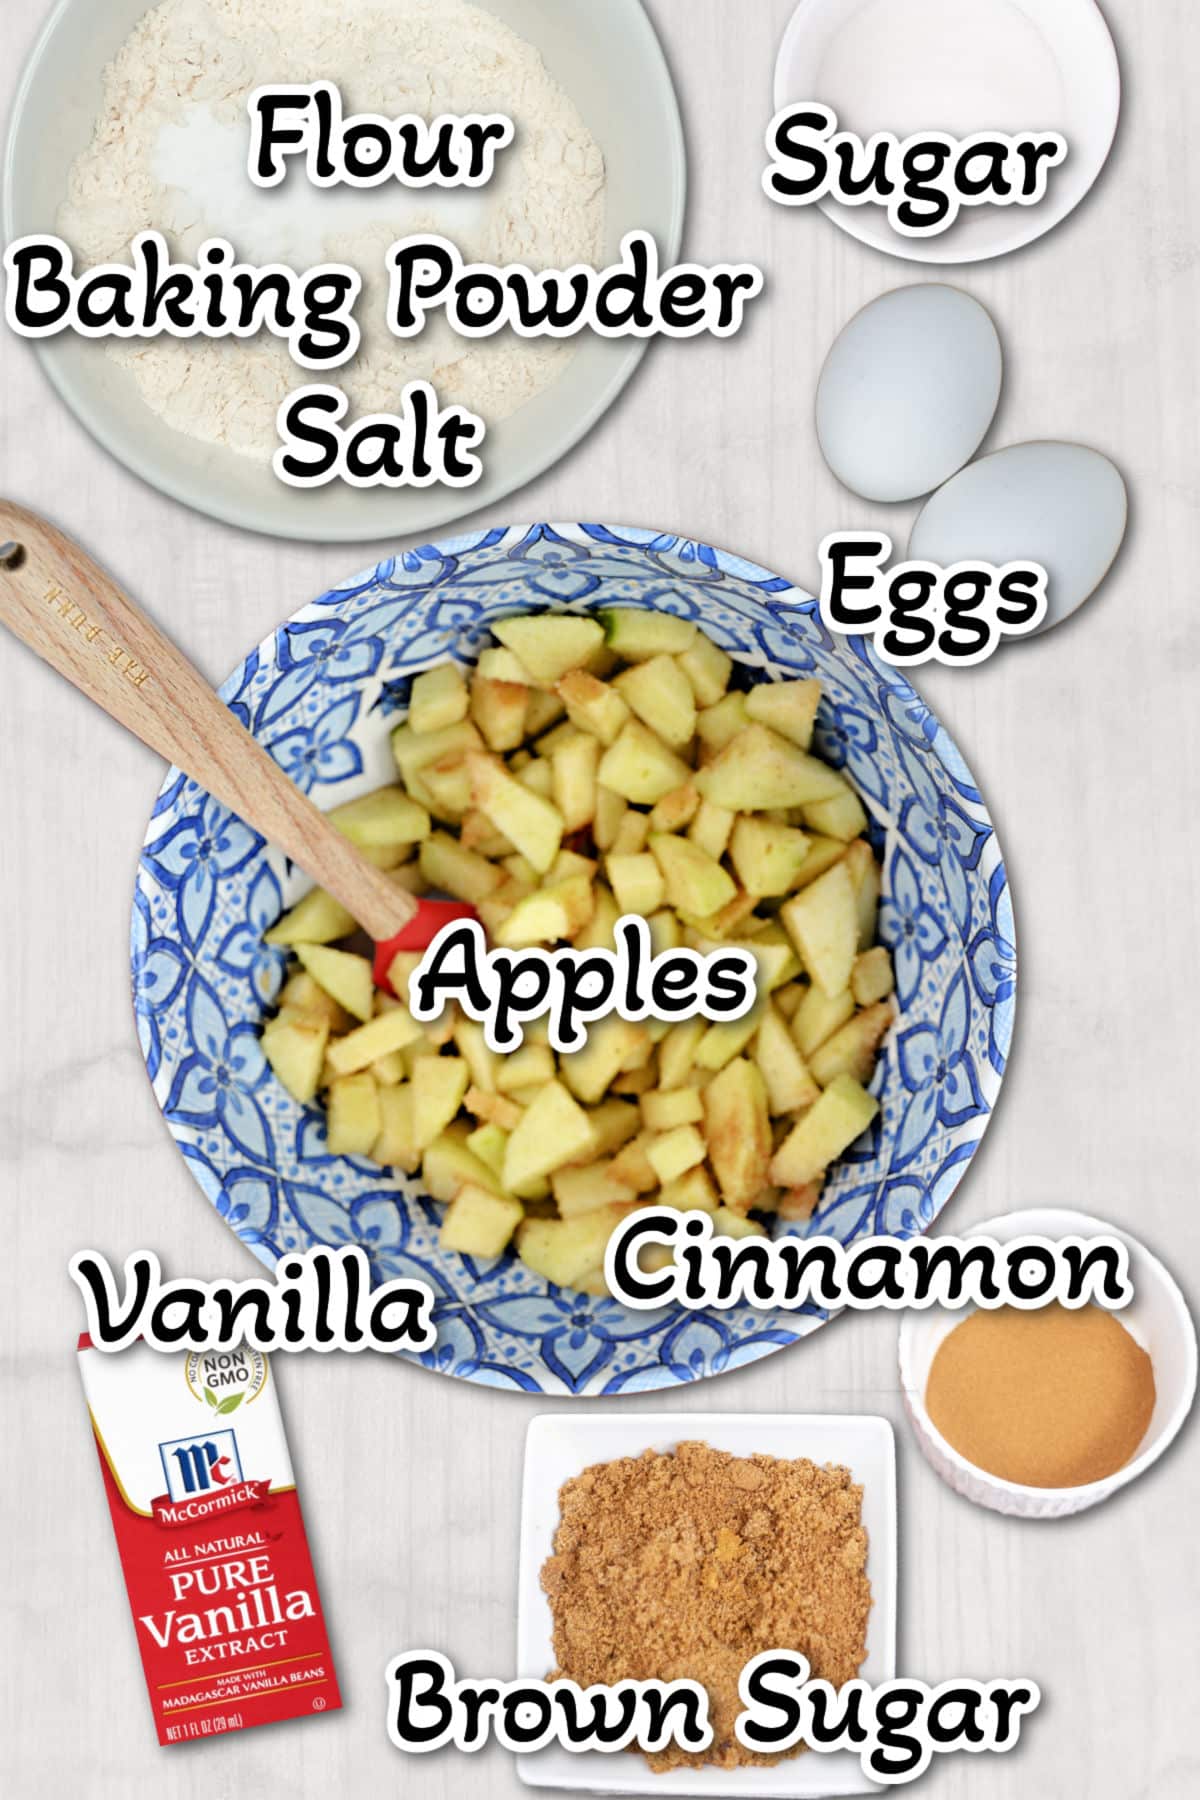 A list of ingredients for apple pie.